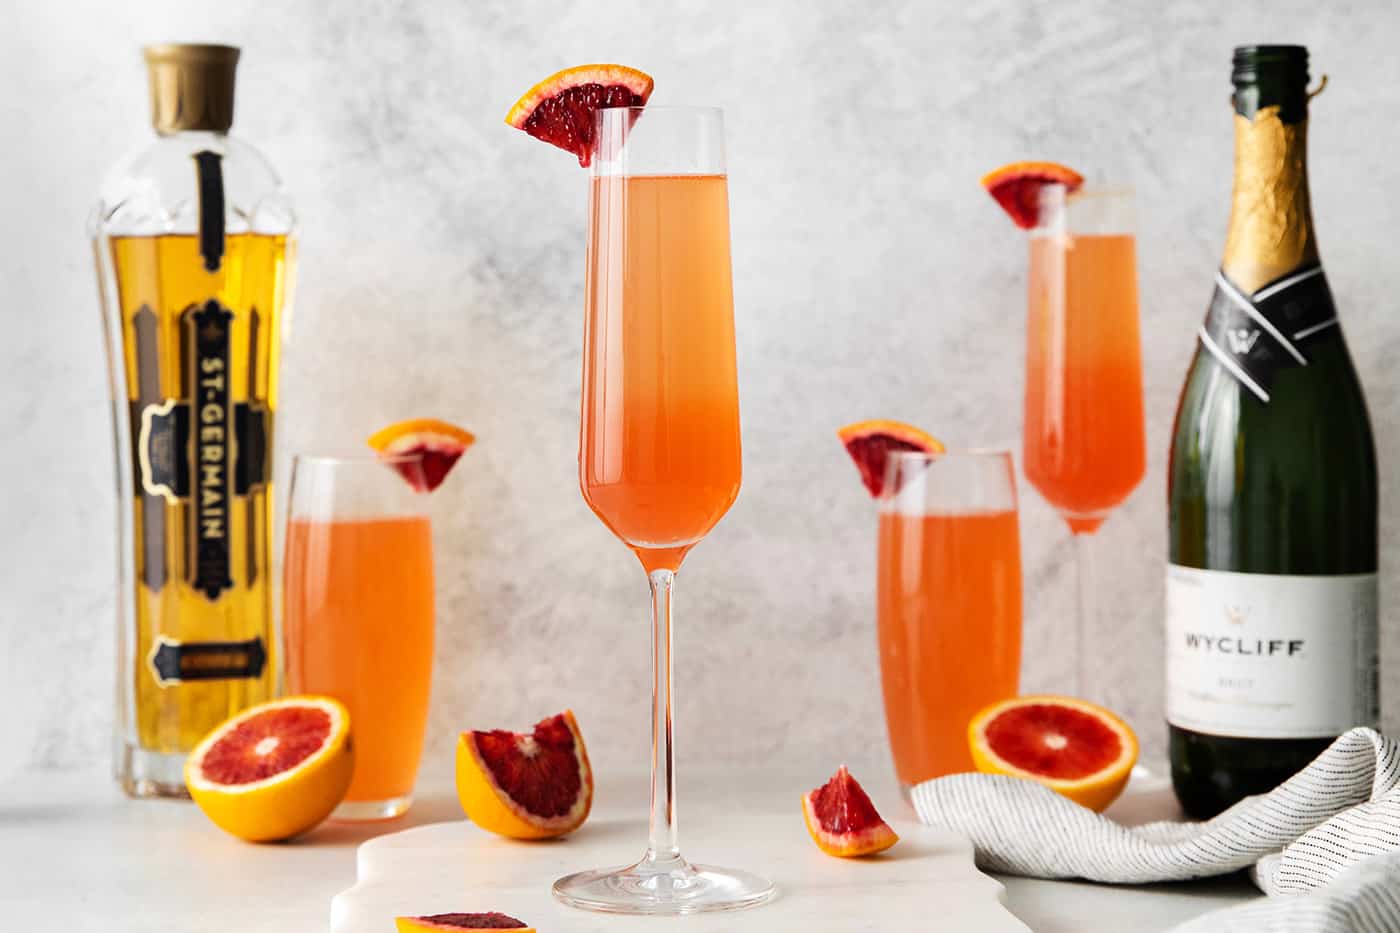 Blood orange mimosas in front of champagne and st germain bottles